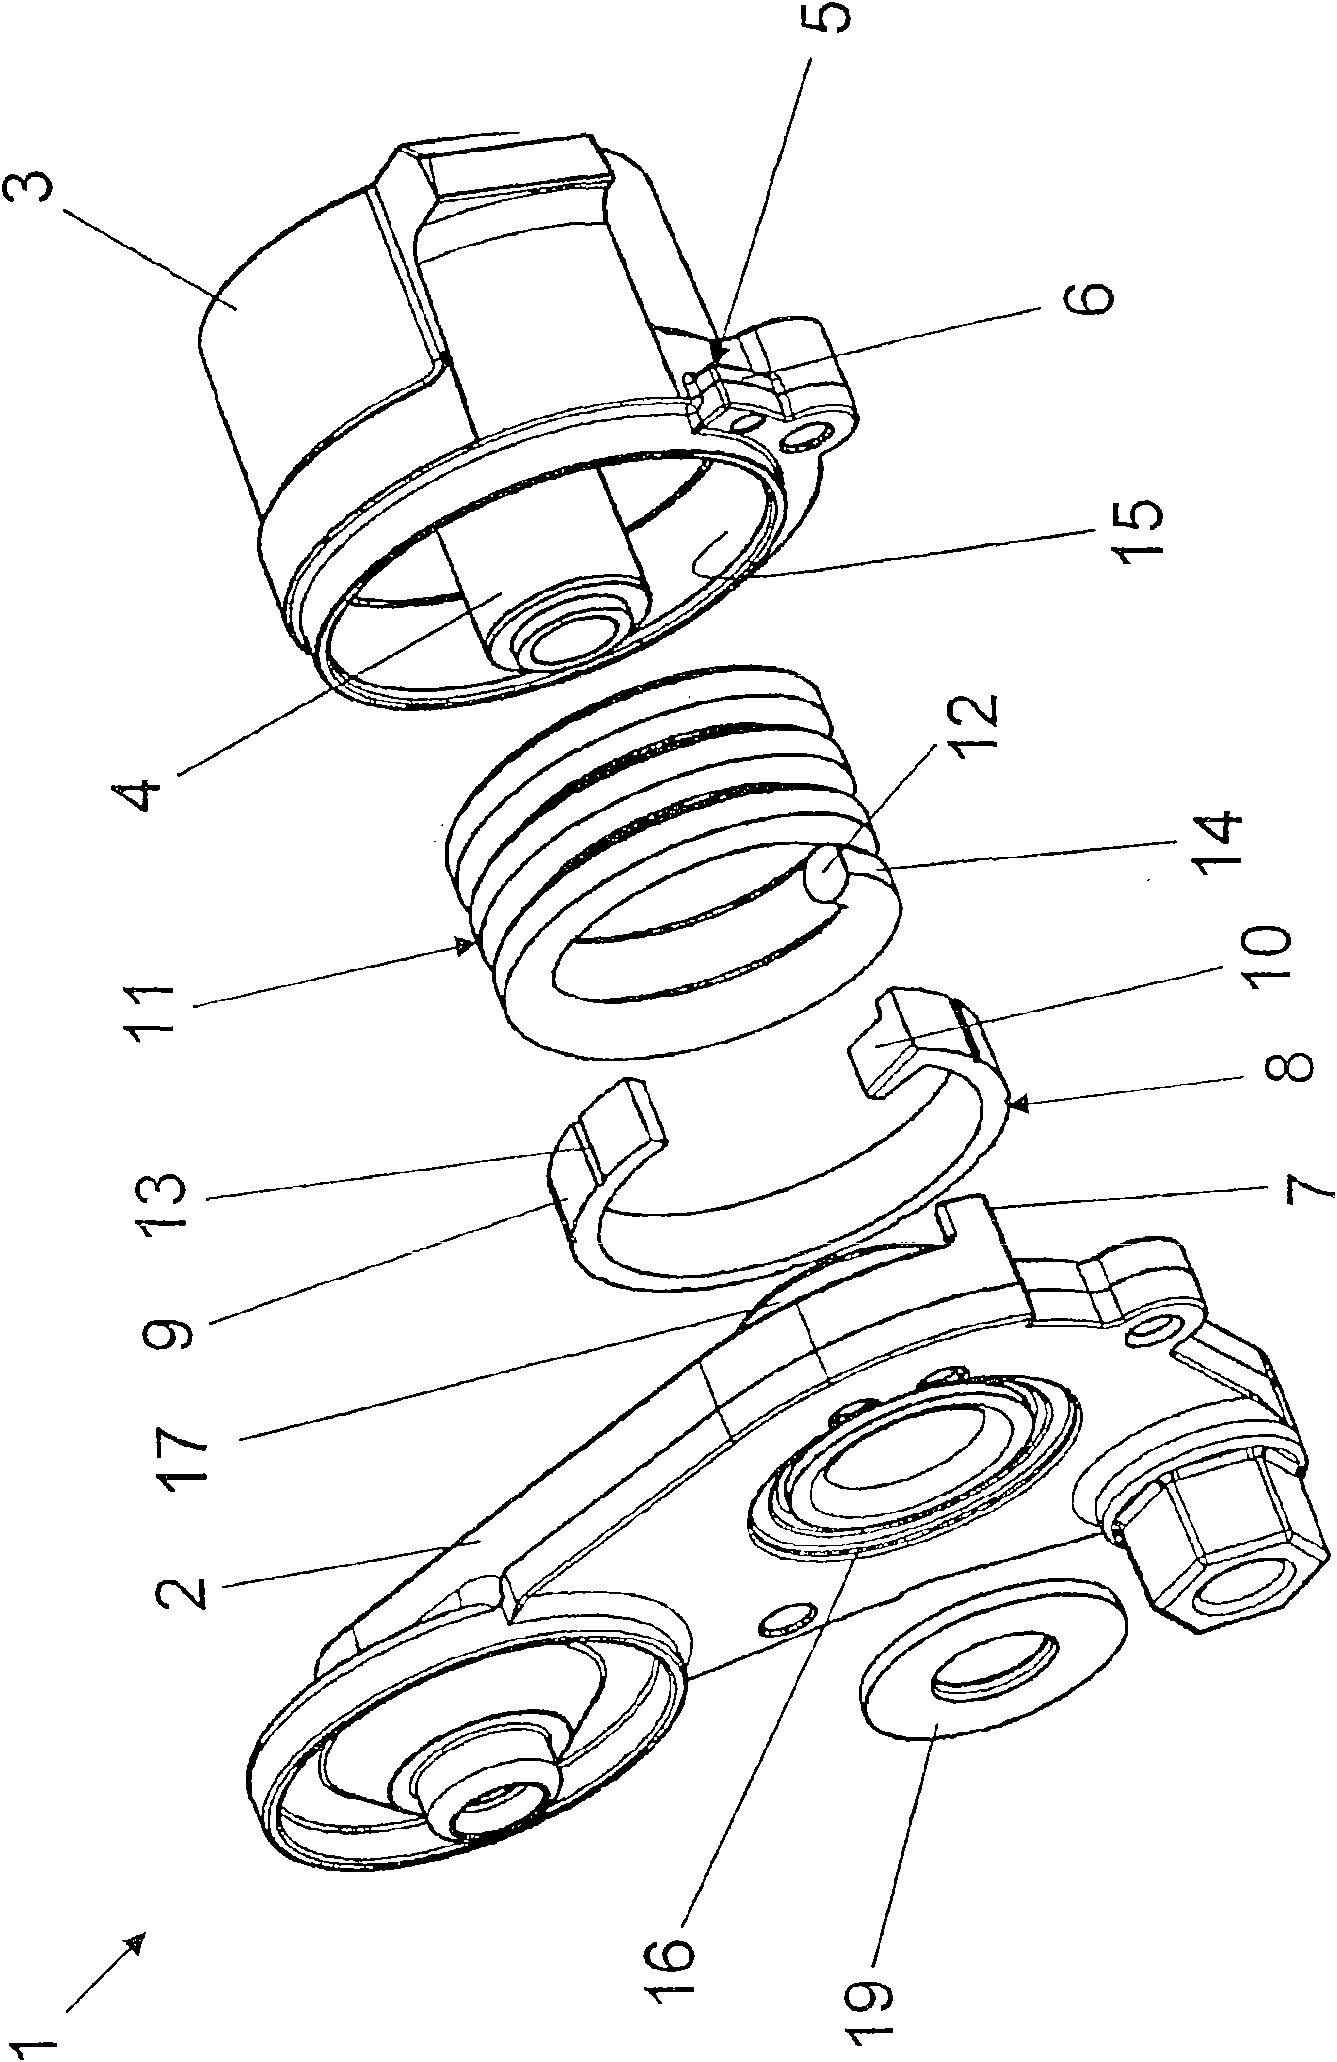 Damping device of a mechanical tensioning system for a traction mechanism drive